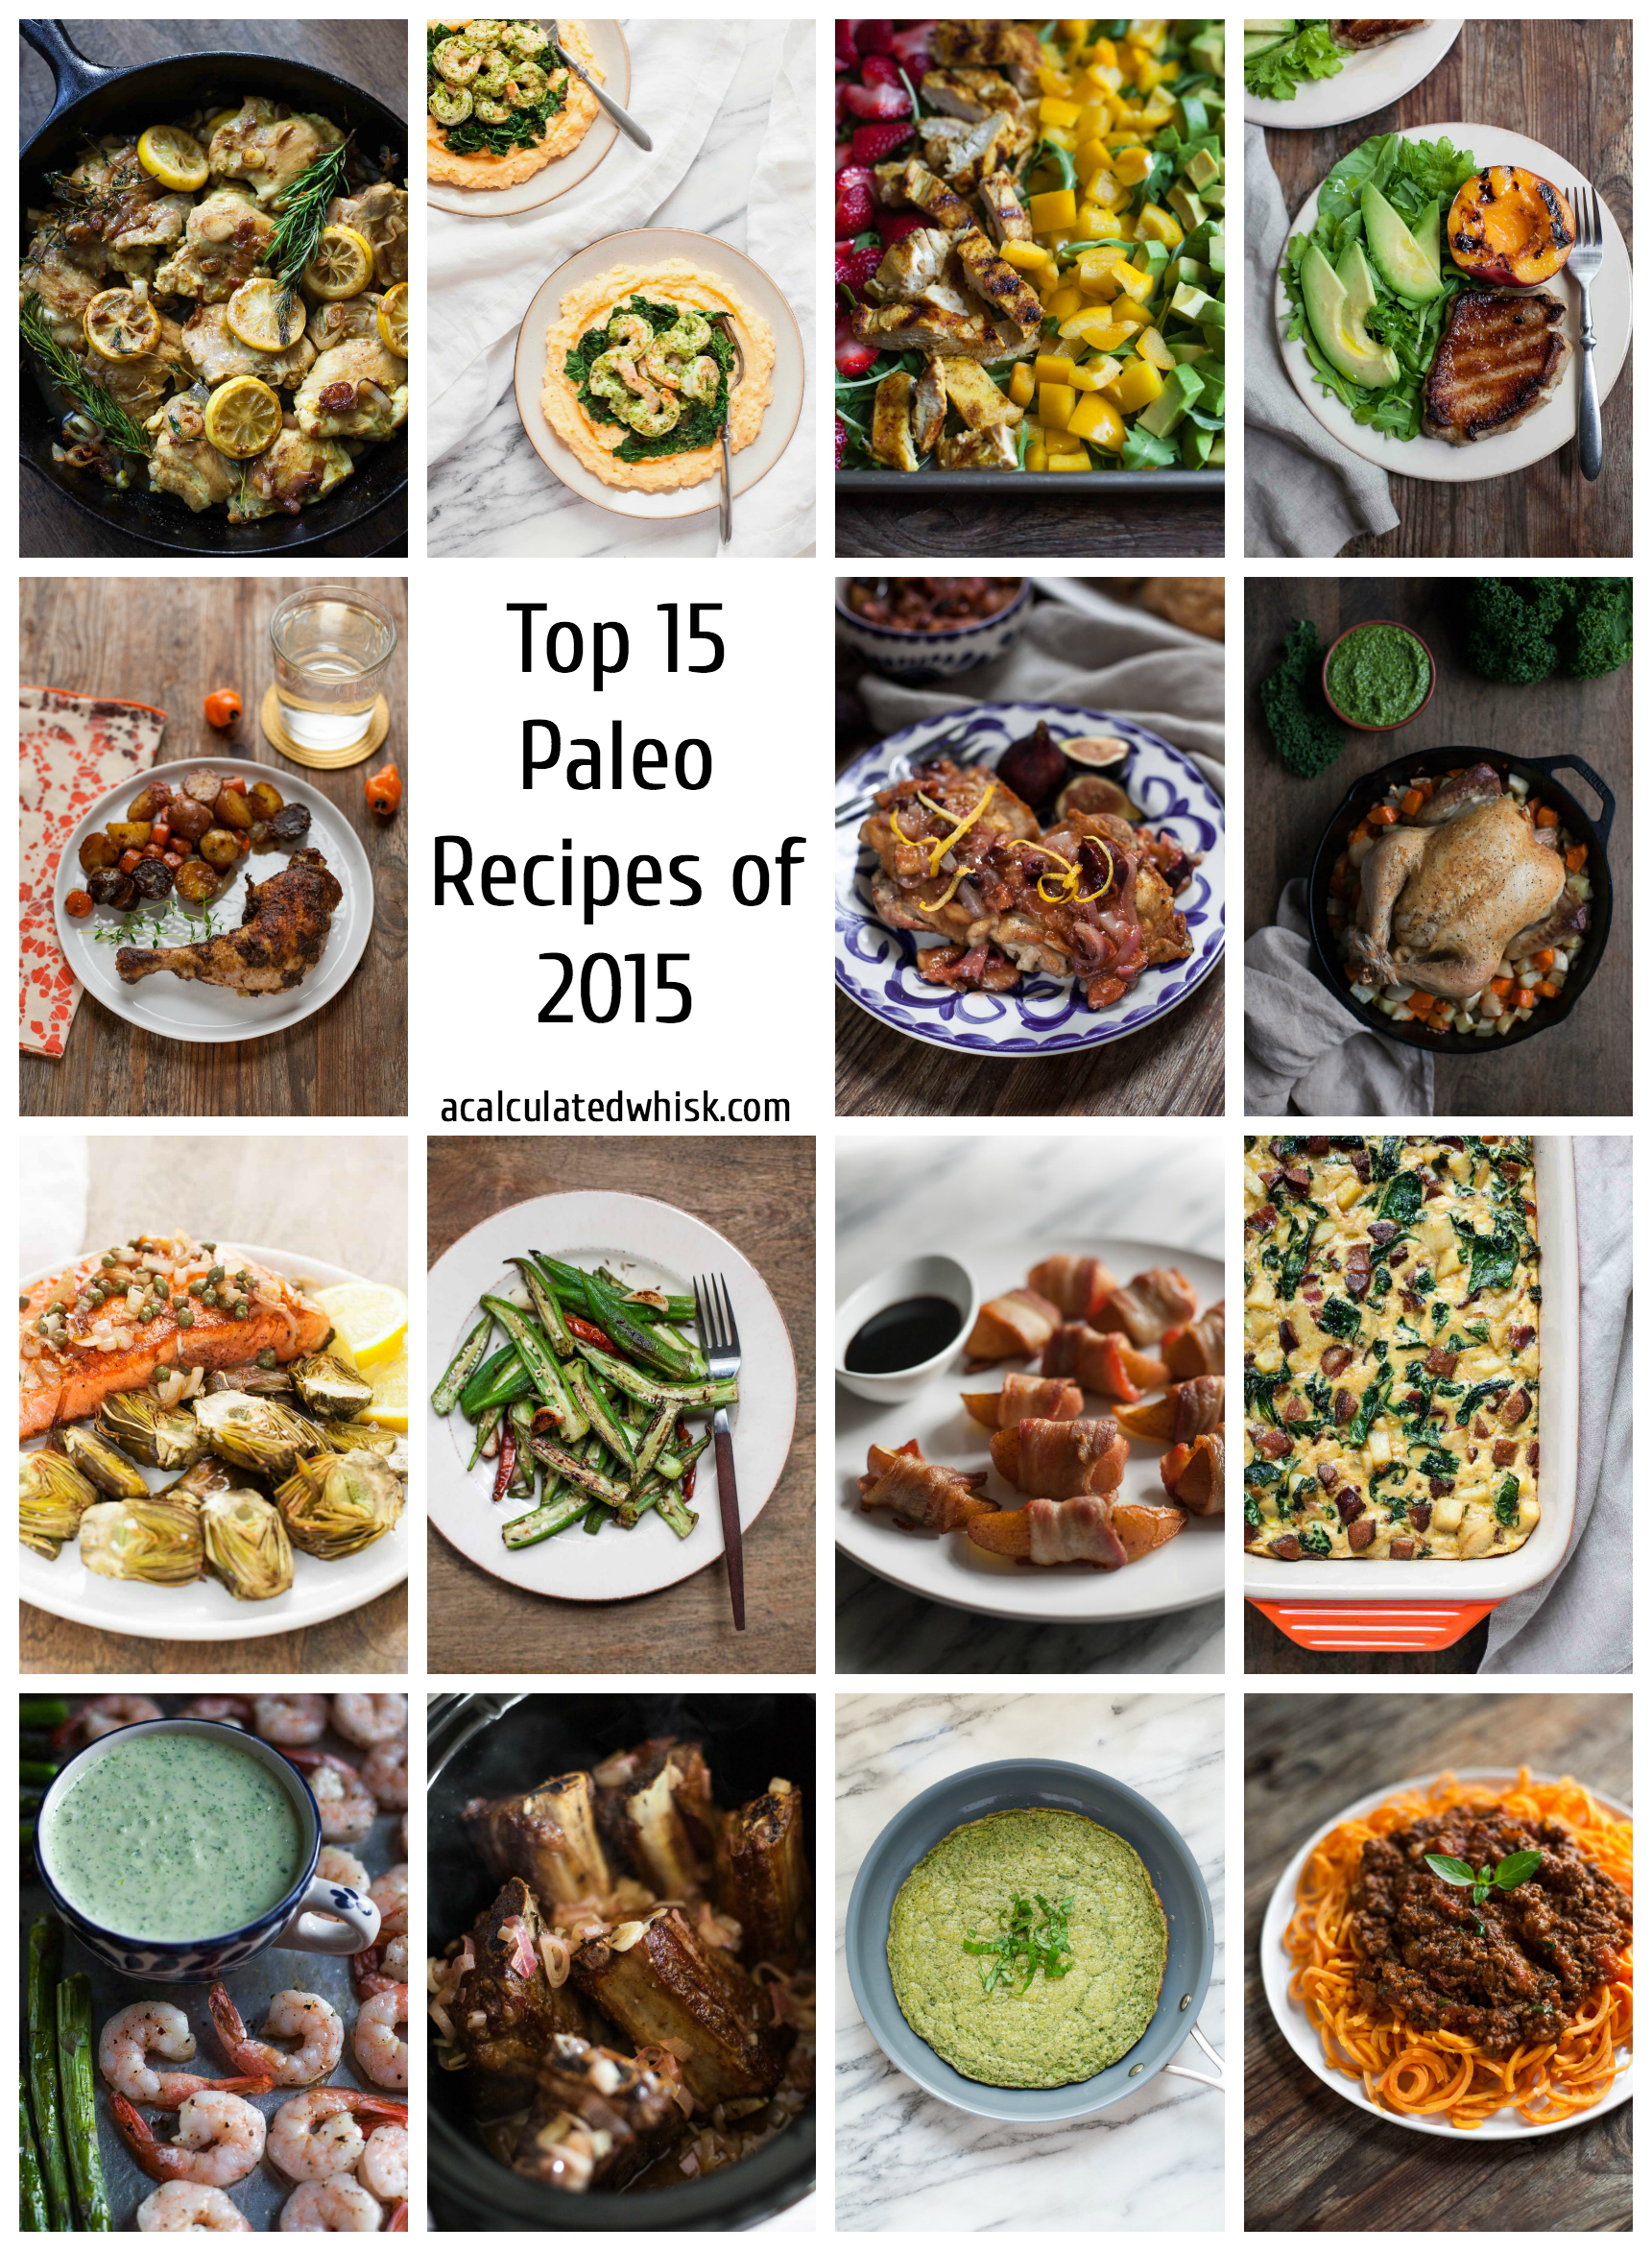 Top 15 Paleo Recipes of 2015 (Whole30 compliant!) | acalculatedwhisk.com